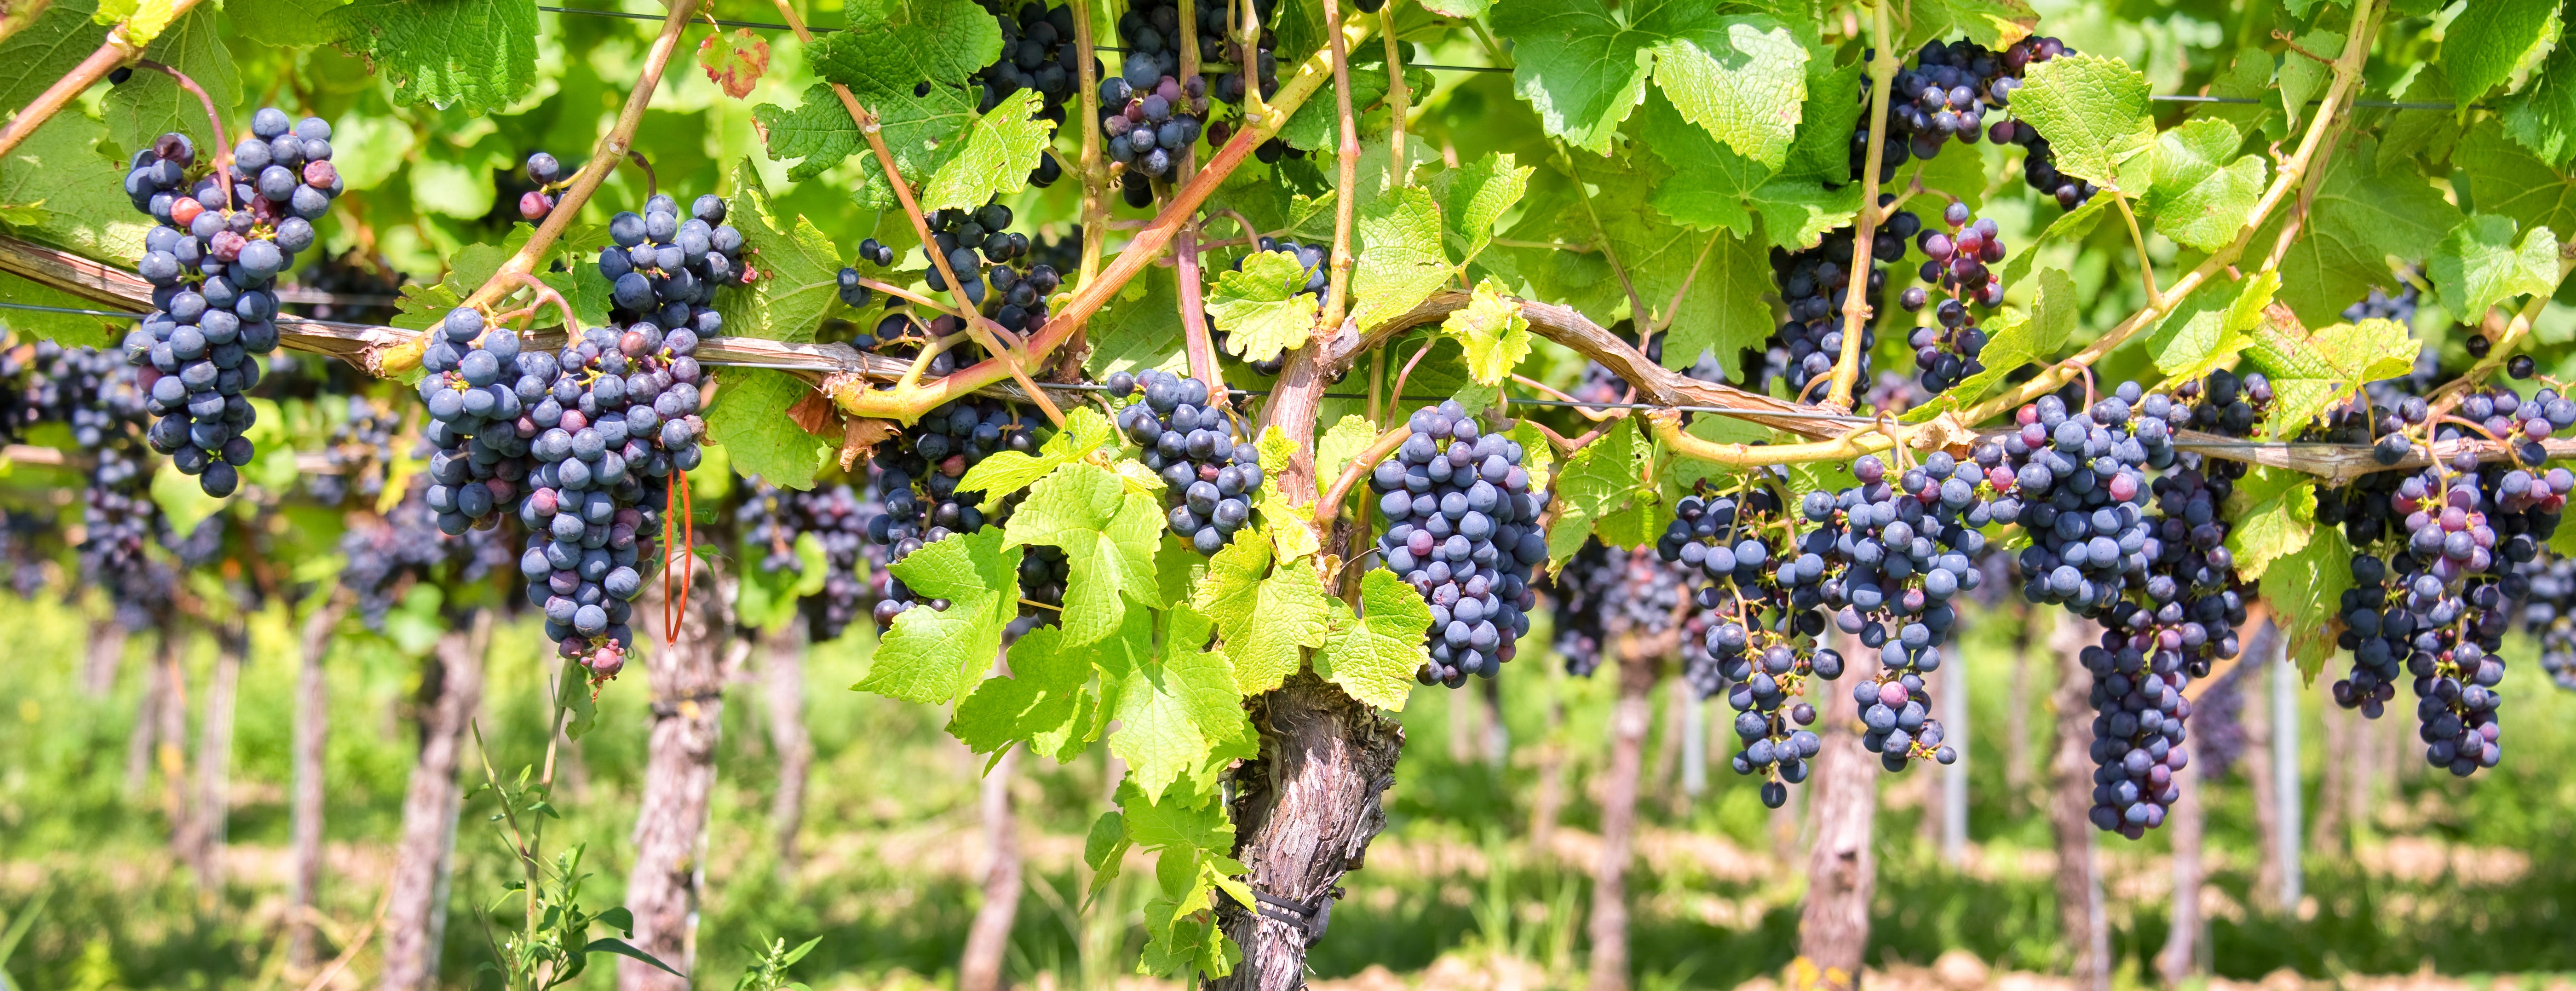 Learn How Grapes Grow: Bloom, Veraison, and Ripening